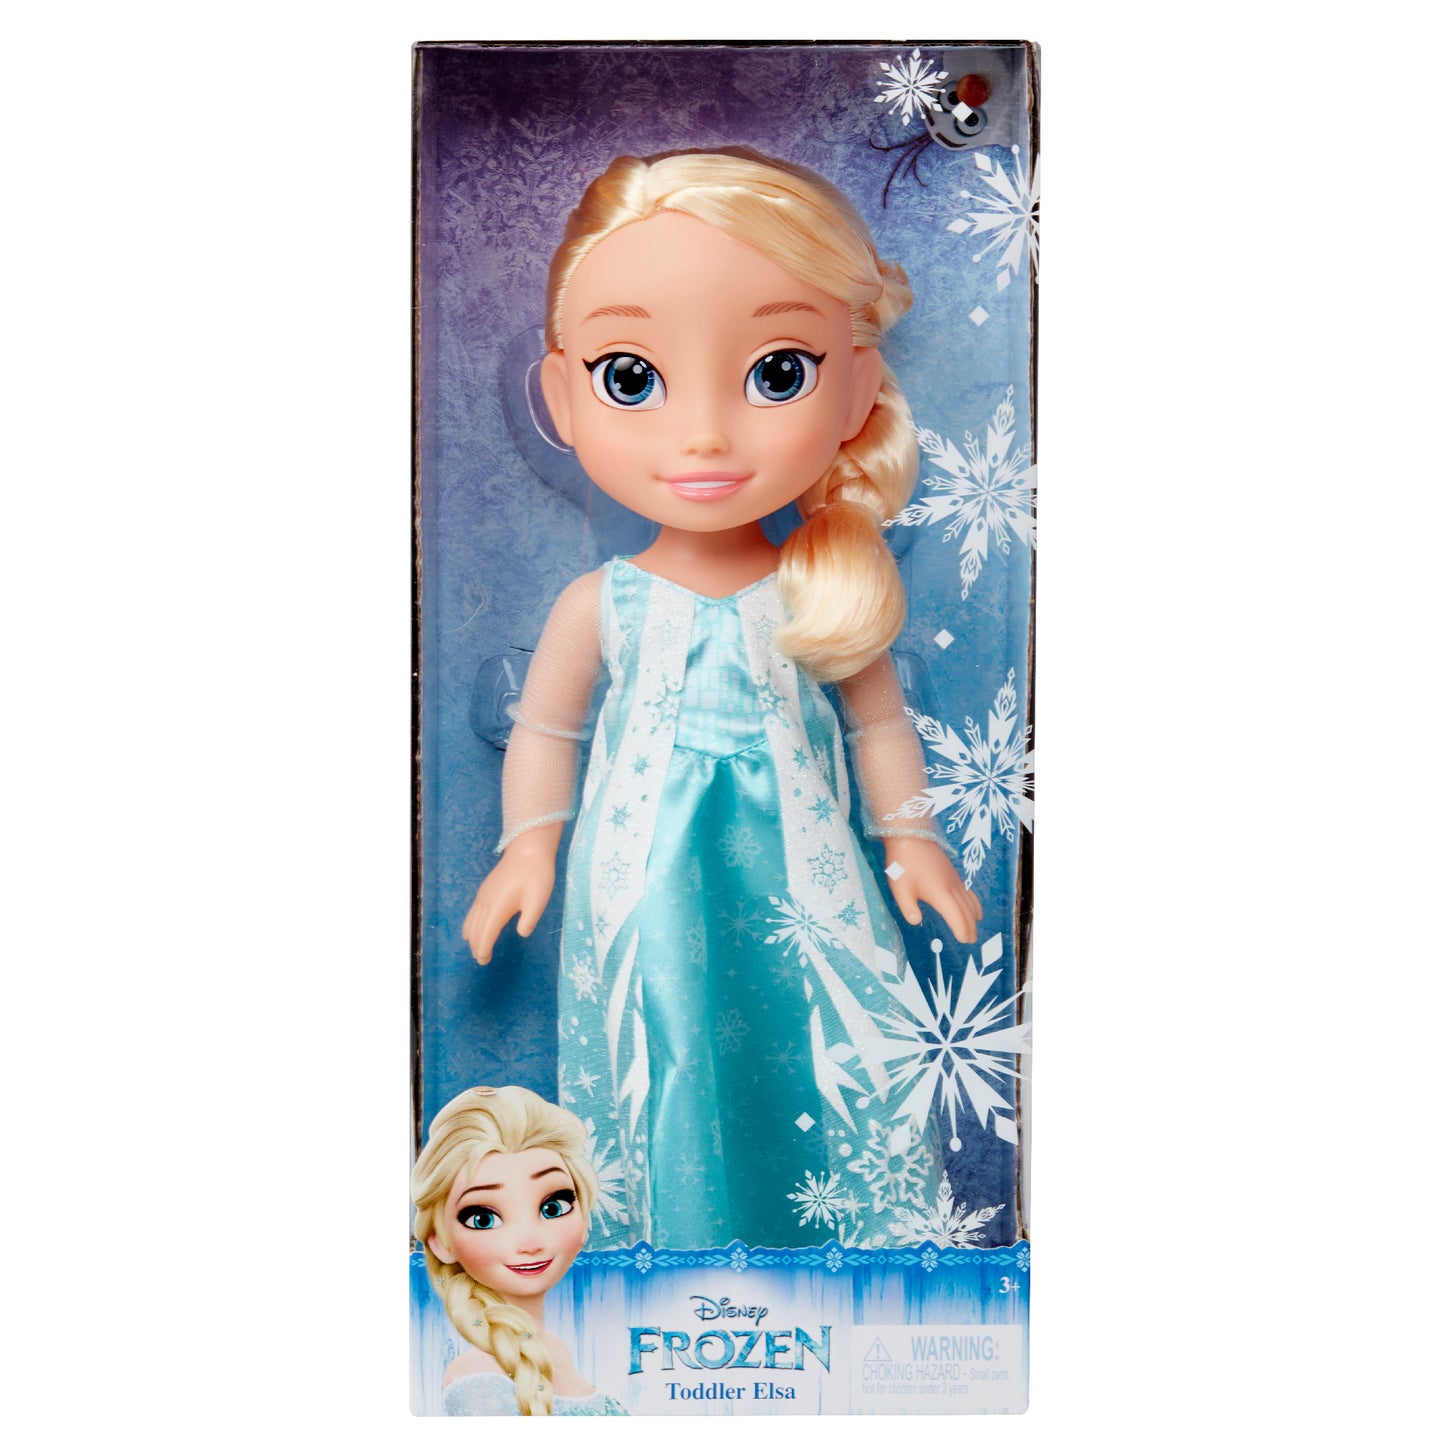 Disney Frozen Elsa Toddler Doll, with Movie Inspired & Outfit, Shoes & Braided Hair Style - Approximately 14" Tall ( Random Style Pick)